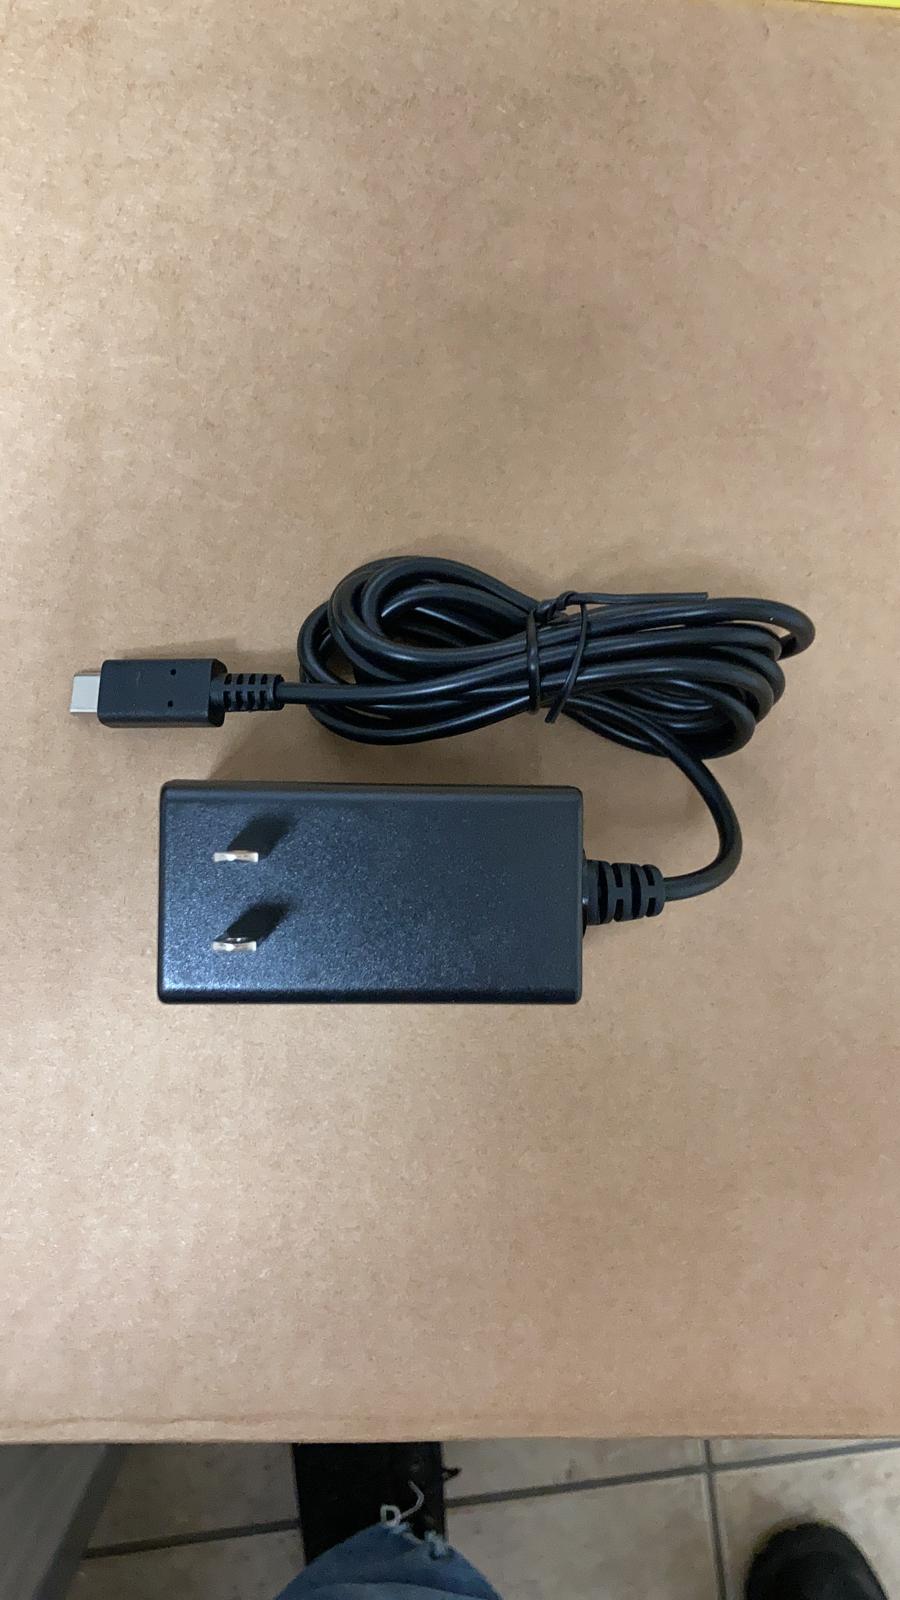 Nintendo Switch AC Adapter with US Plug - Bulk Packaging